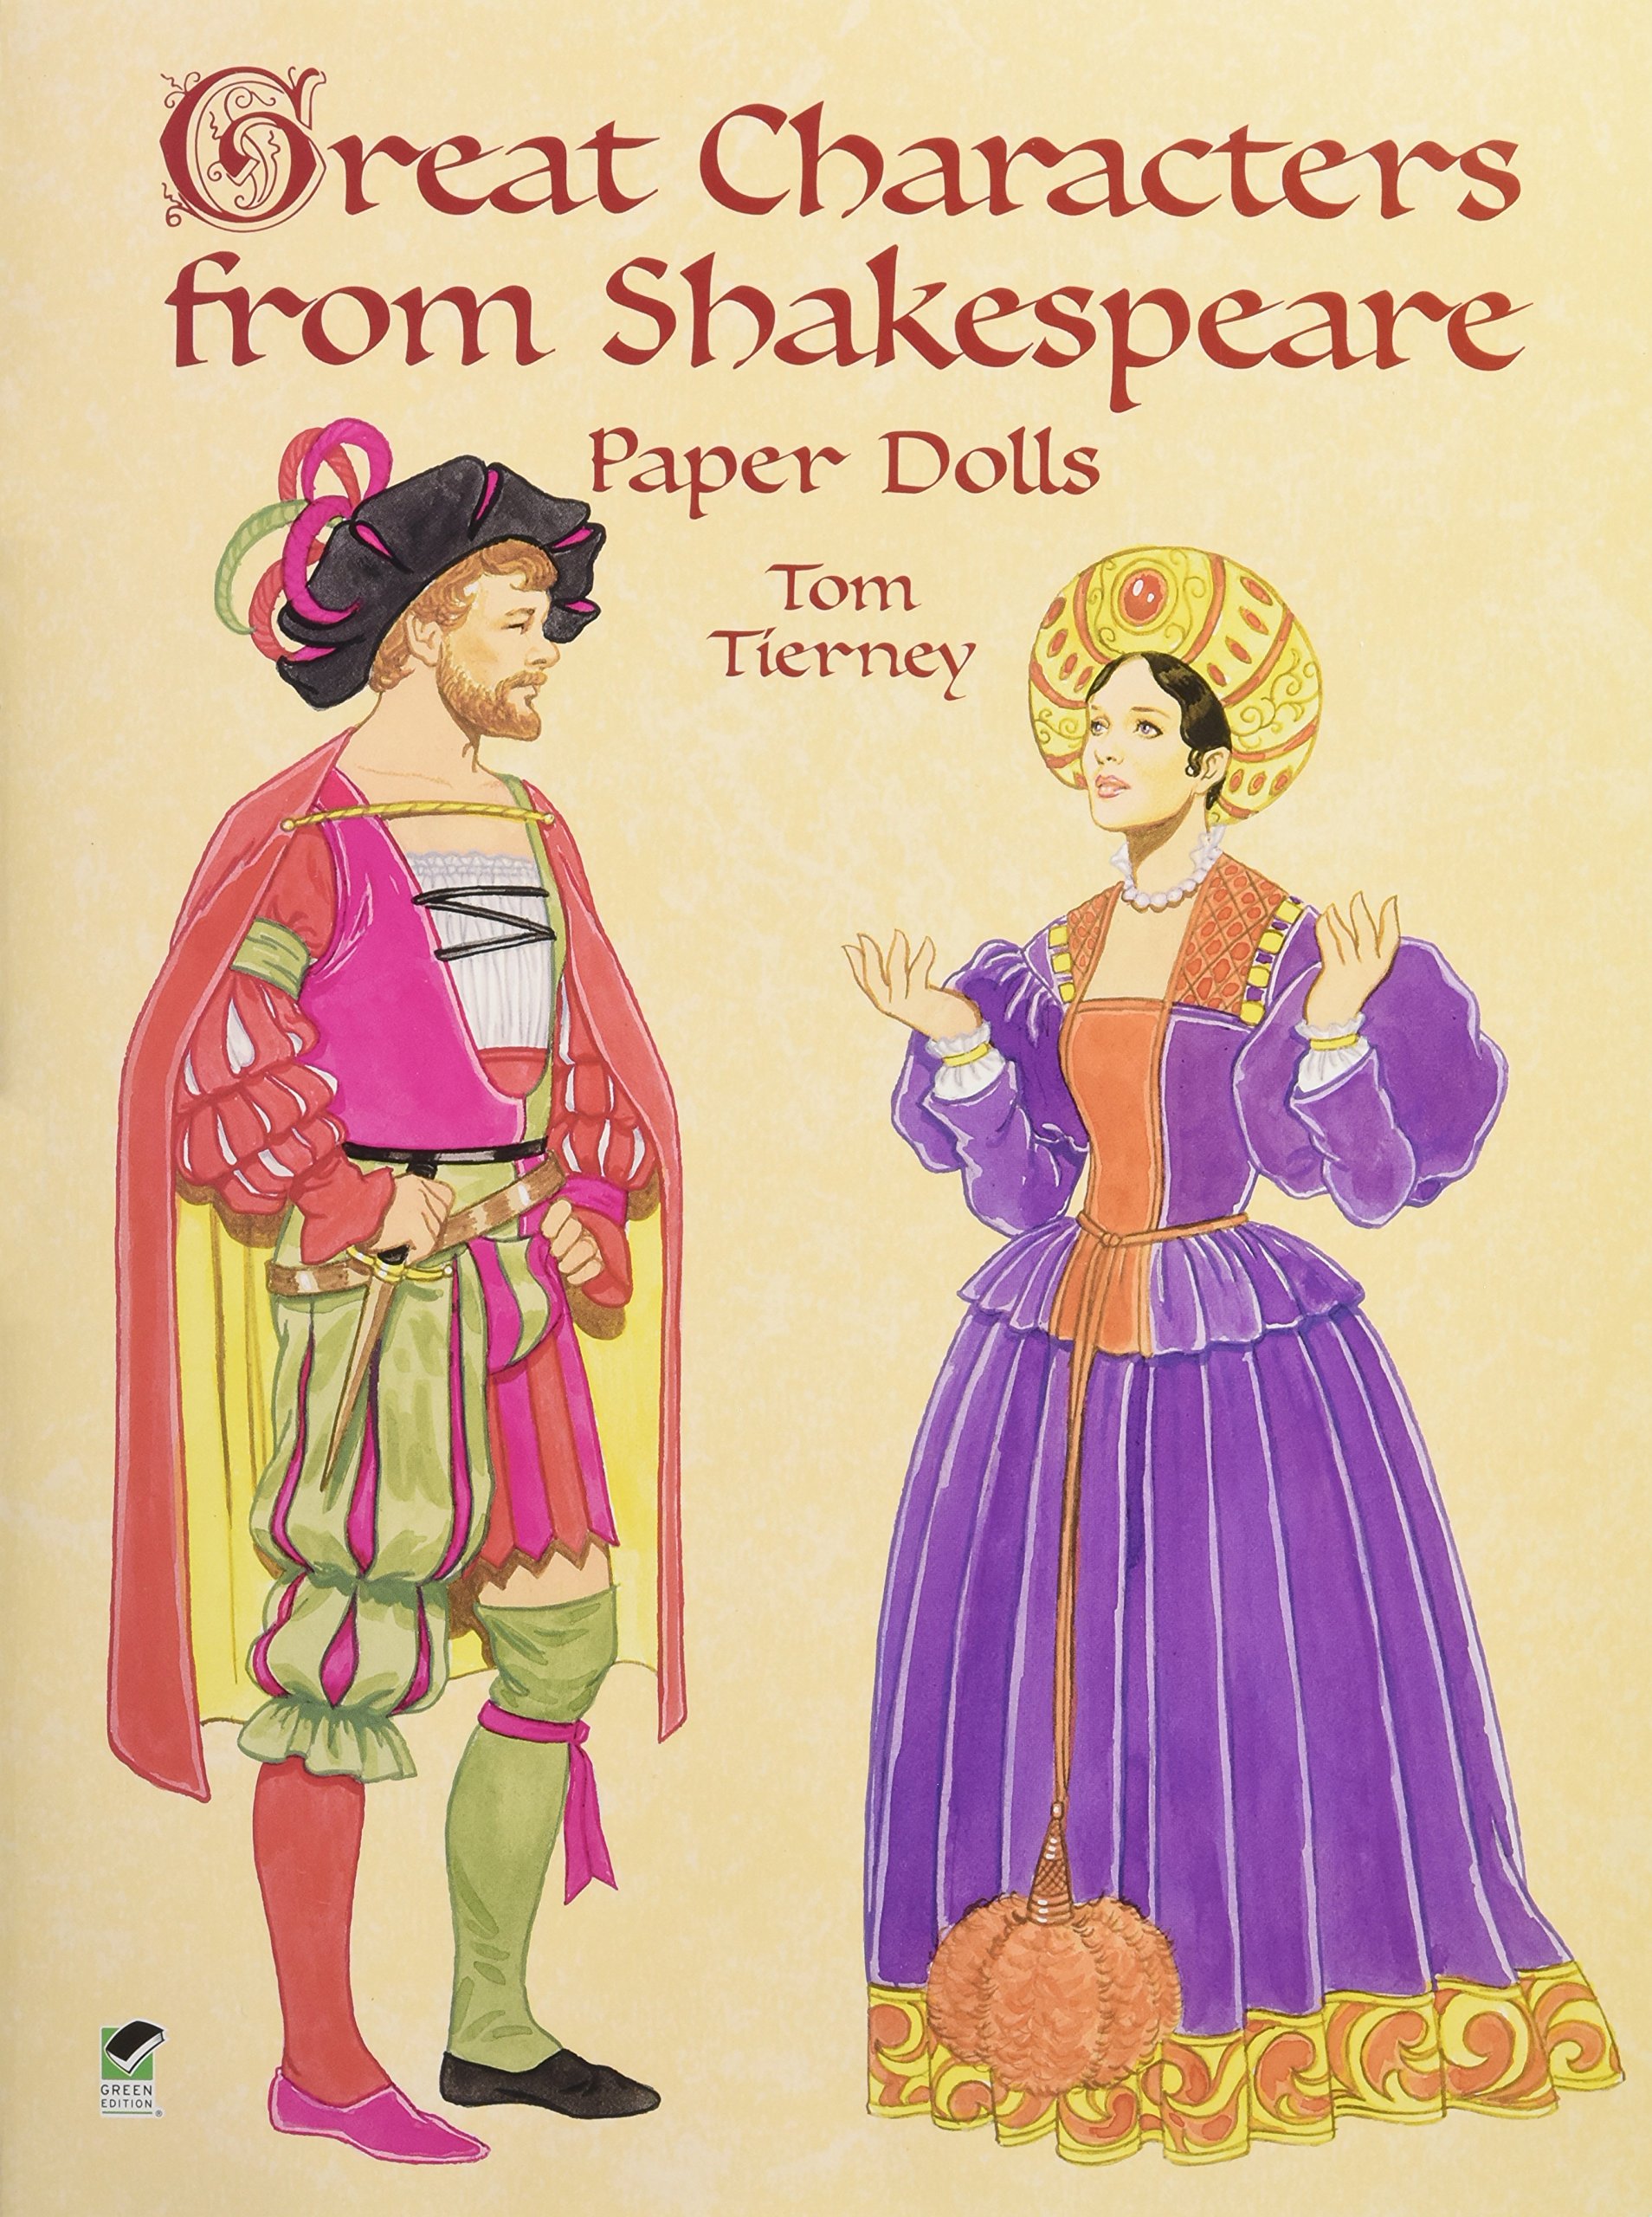 Great Characters from Shakespeare Paper Dolls (Dover Paper Dolls)